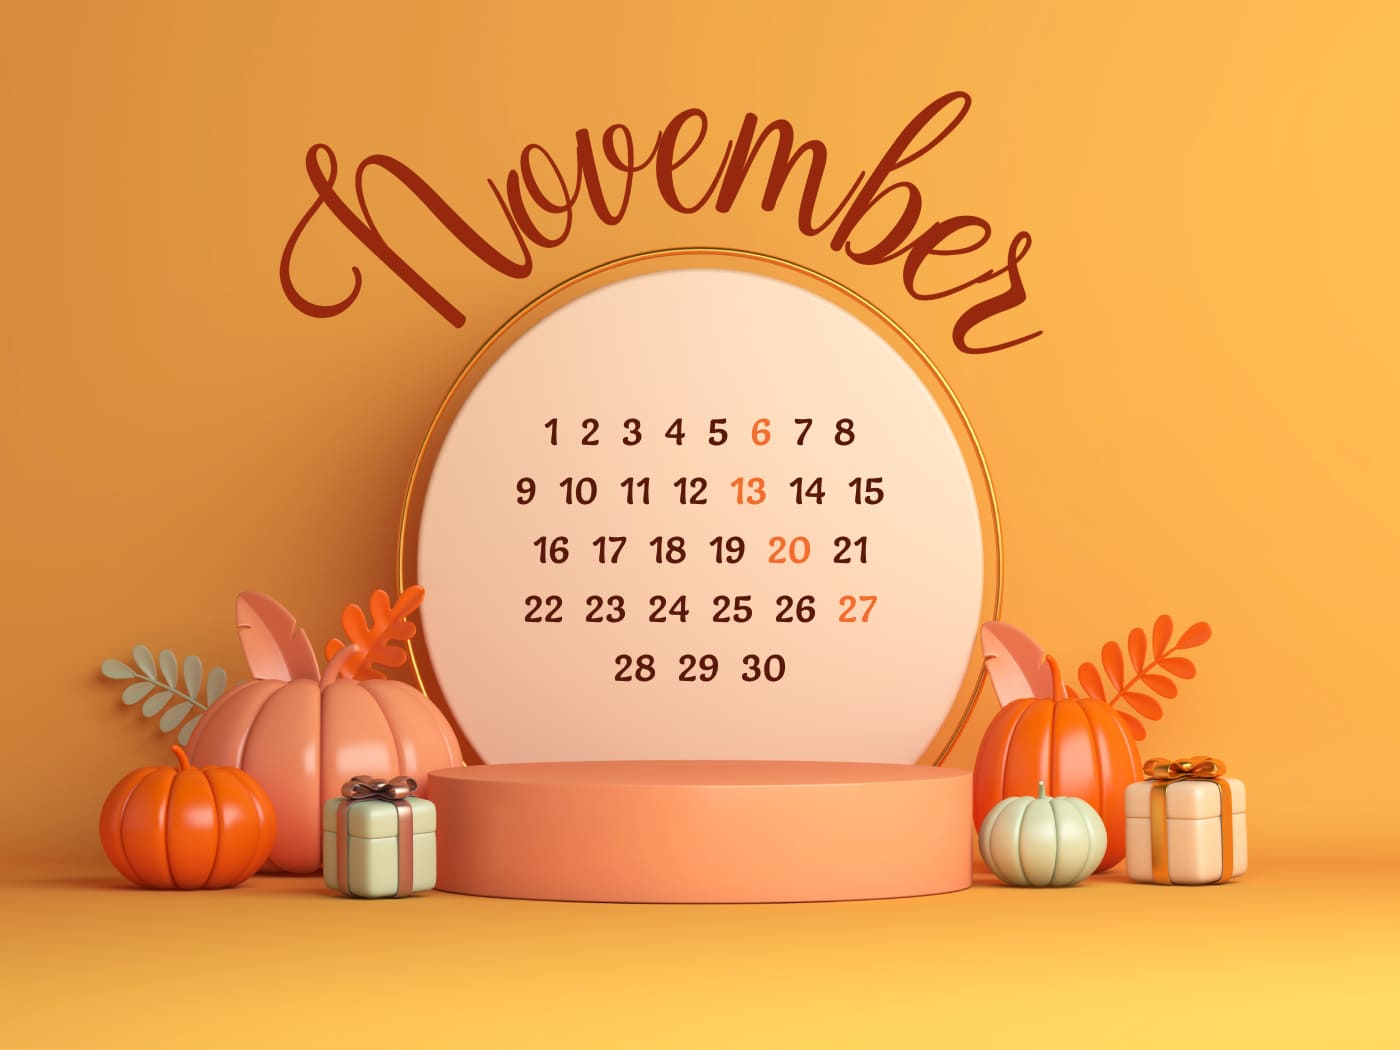 Free November calendar in yellow colors on the background of autumn gifts.